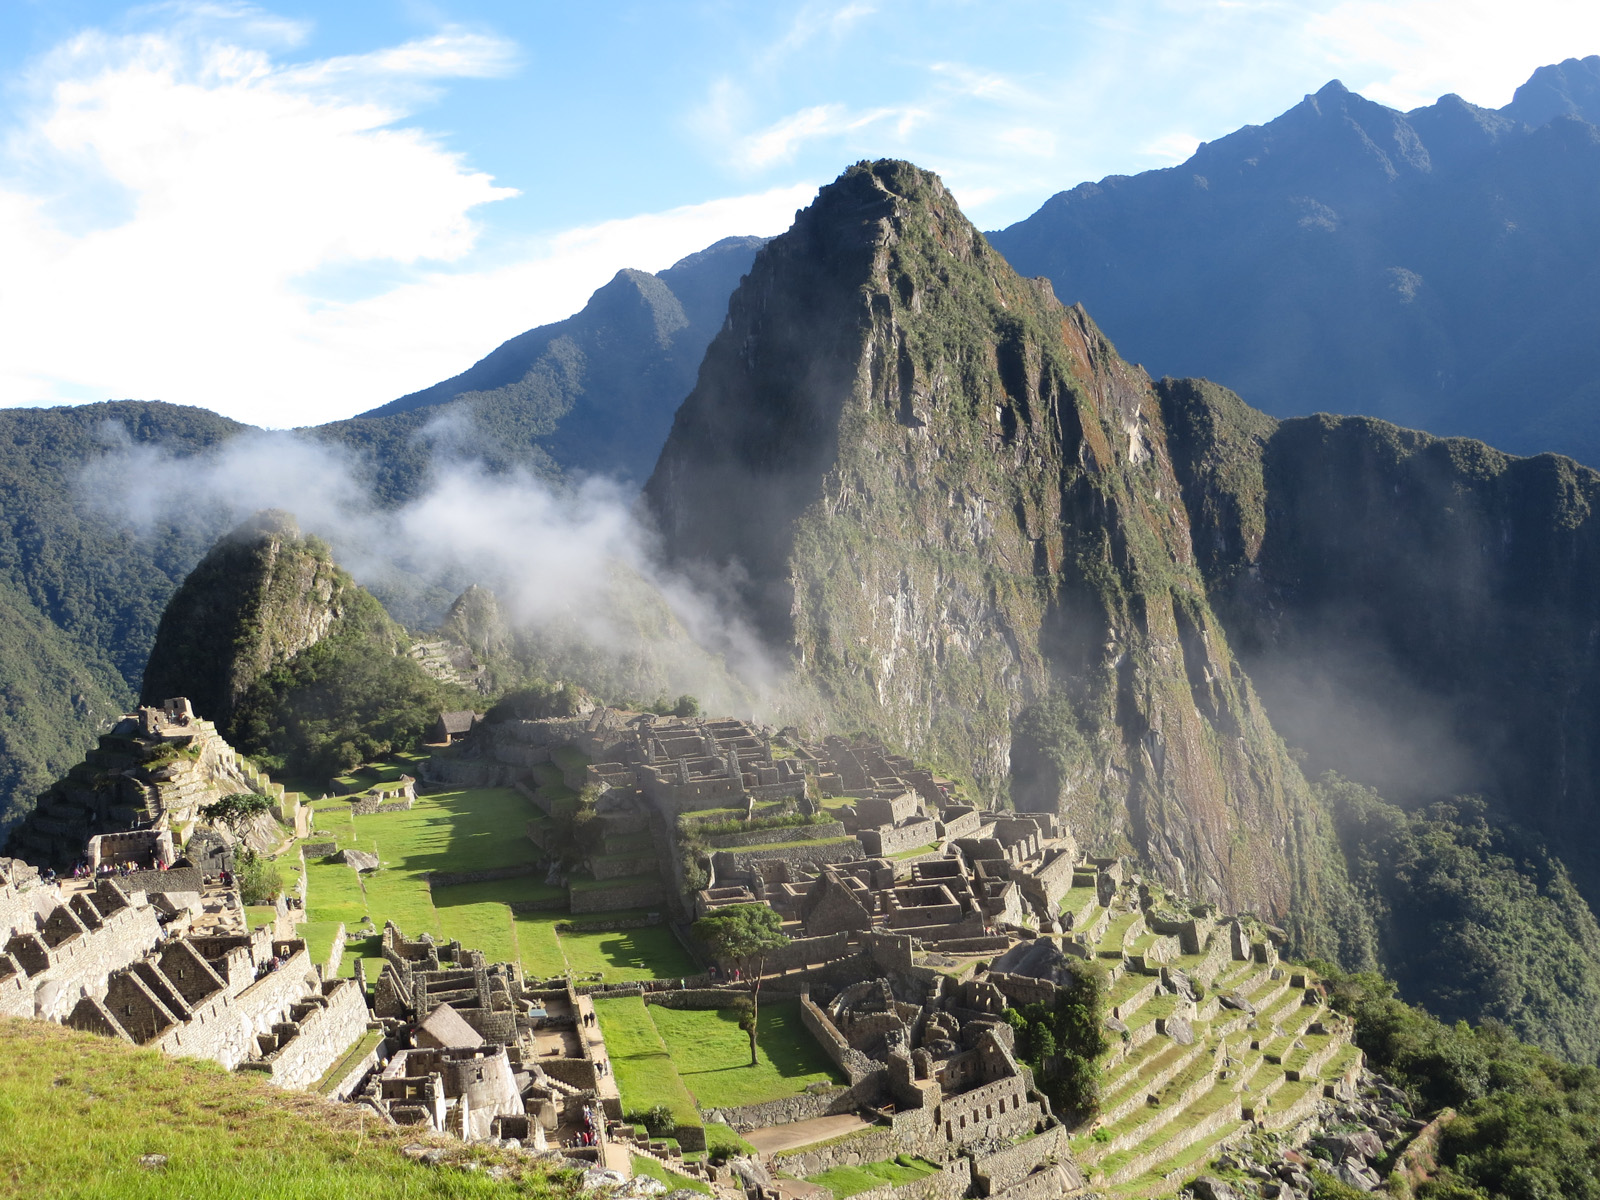 Know the new schedules for Machu Picchu